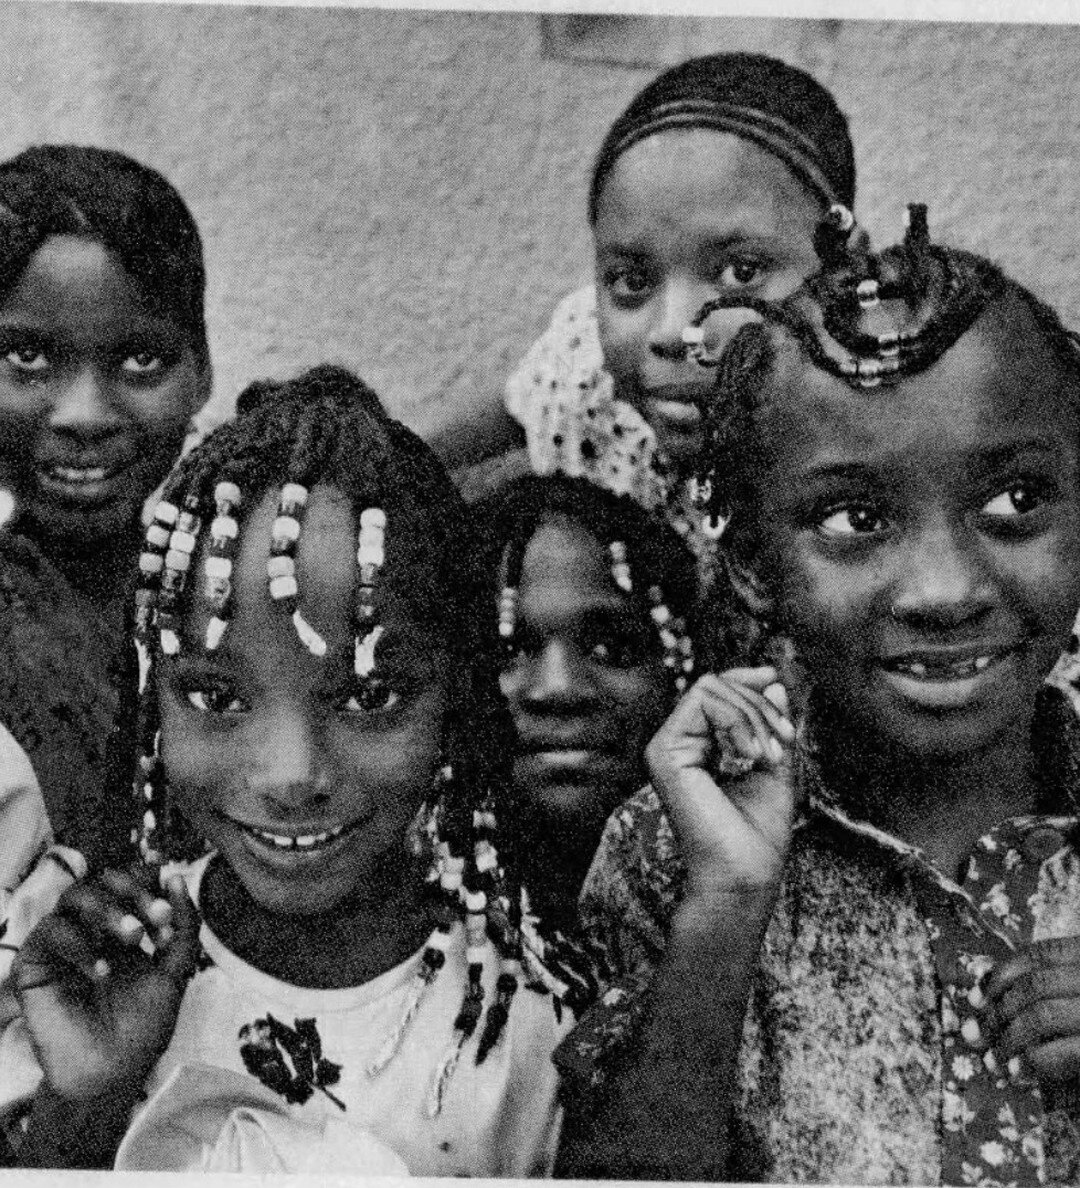 Beautiful students at Toussaint L'ouverture Elementary School in Little Haiti show off their hair for a hair braiding contest showcase in 1991.

Who are your favorite Miami braiders?

📷 Miami Herald

#blackmiami #blackmiamidade #miamihistory #florid